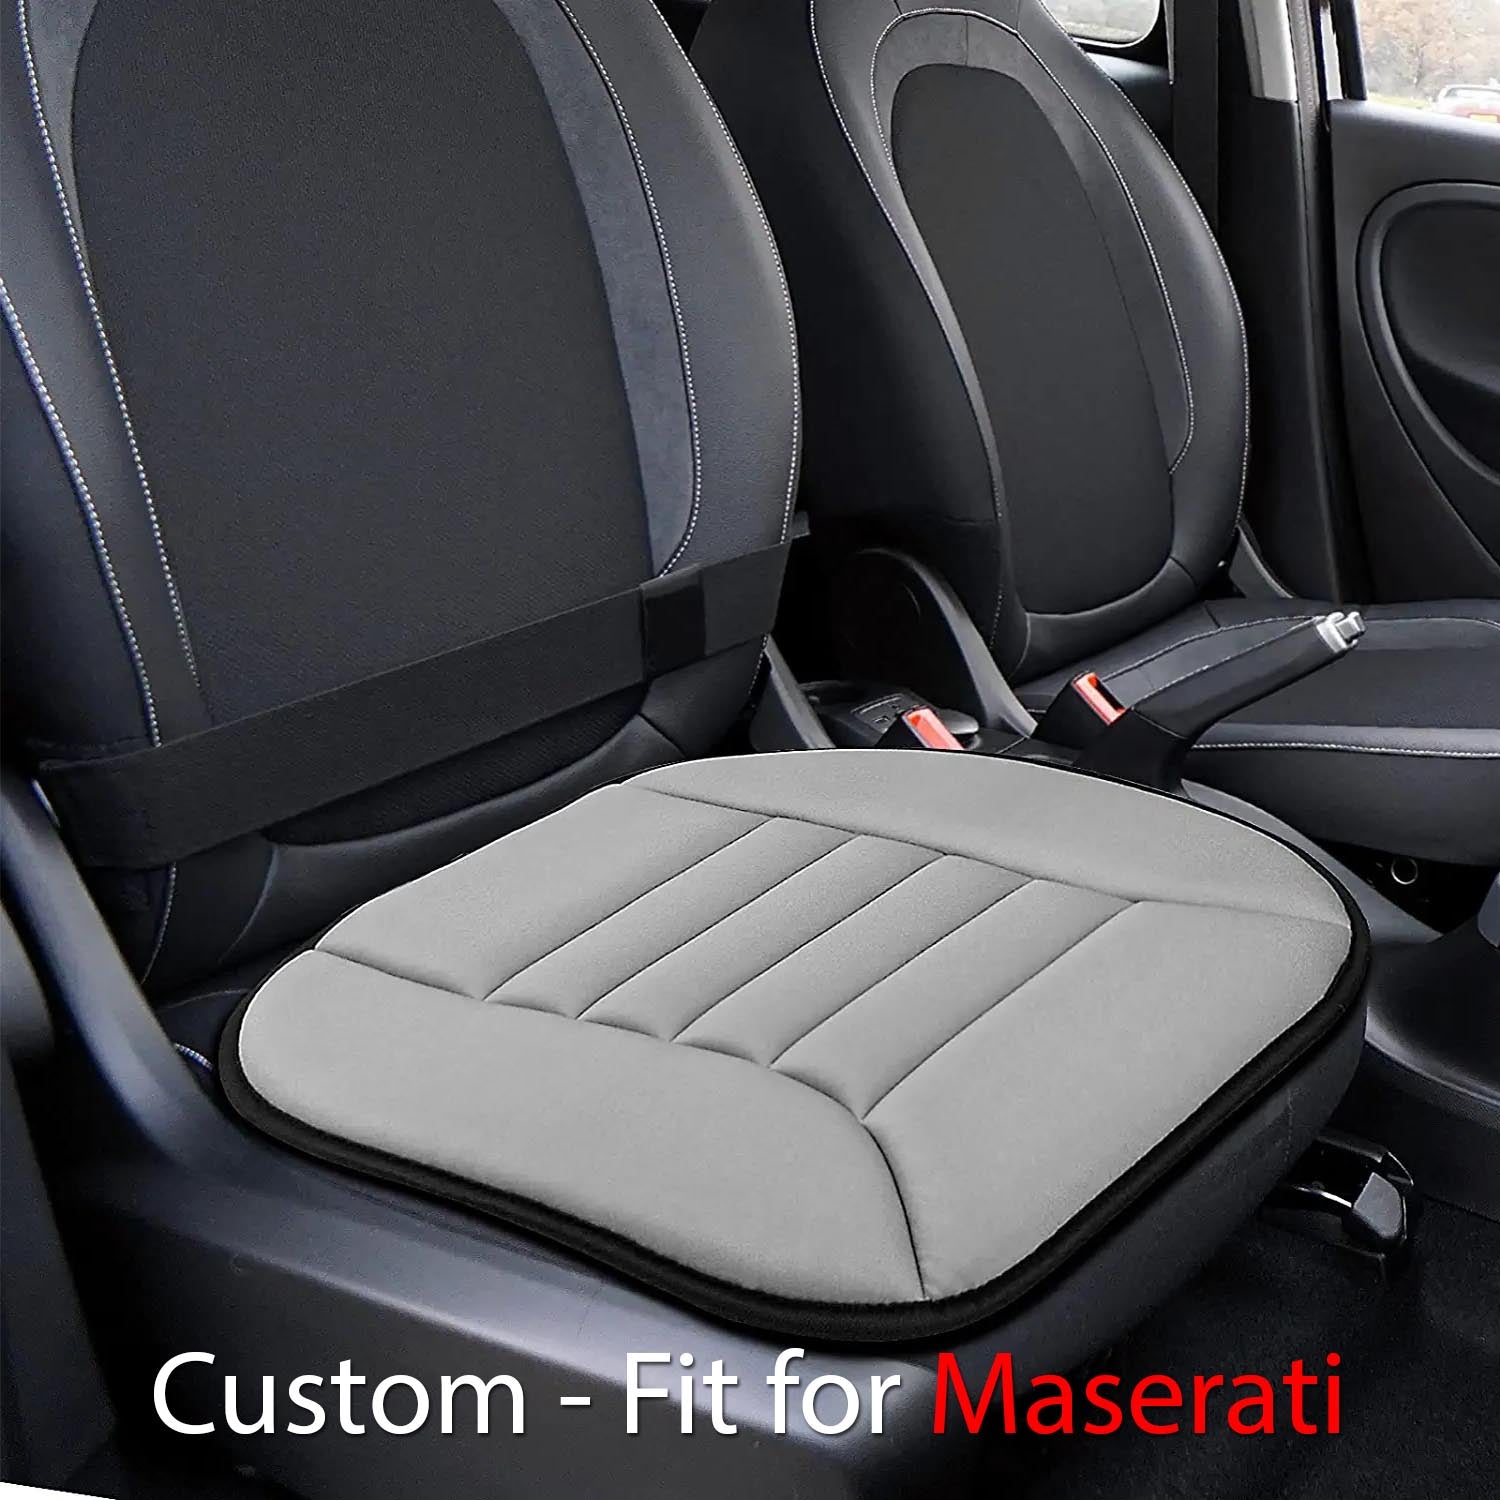 Car Seat Cushion with 1.2inch Comfort Memory Foam, Custom-Fit For Car, Seat Cushion for Car and Office Chair DLMS247